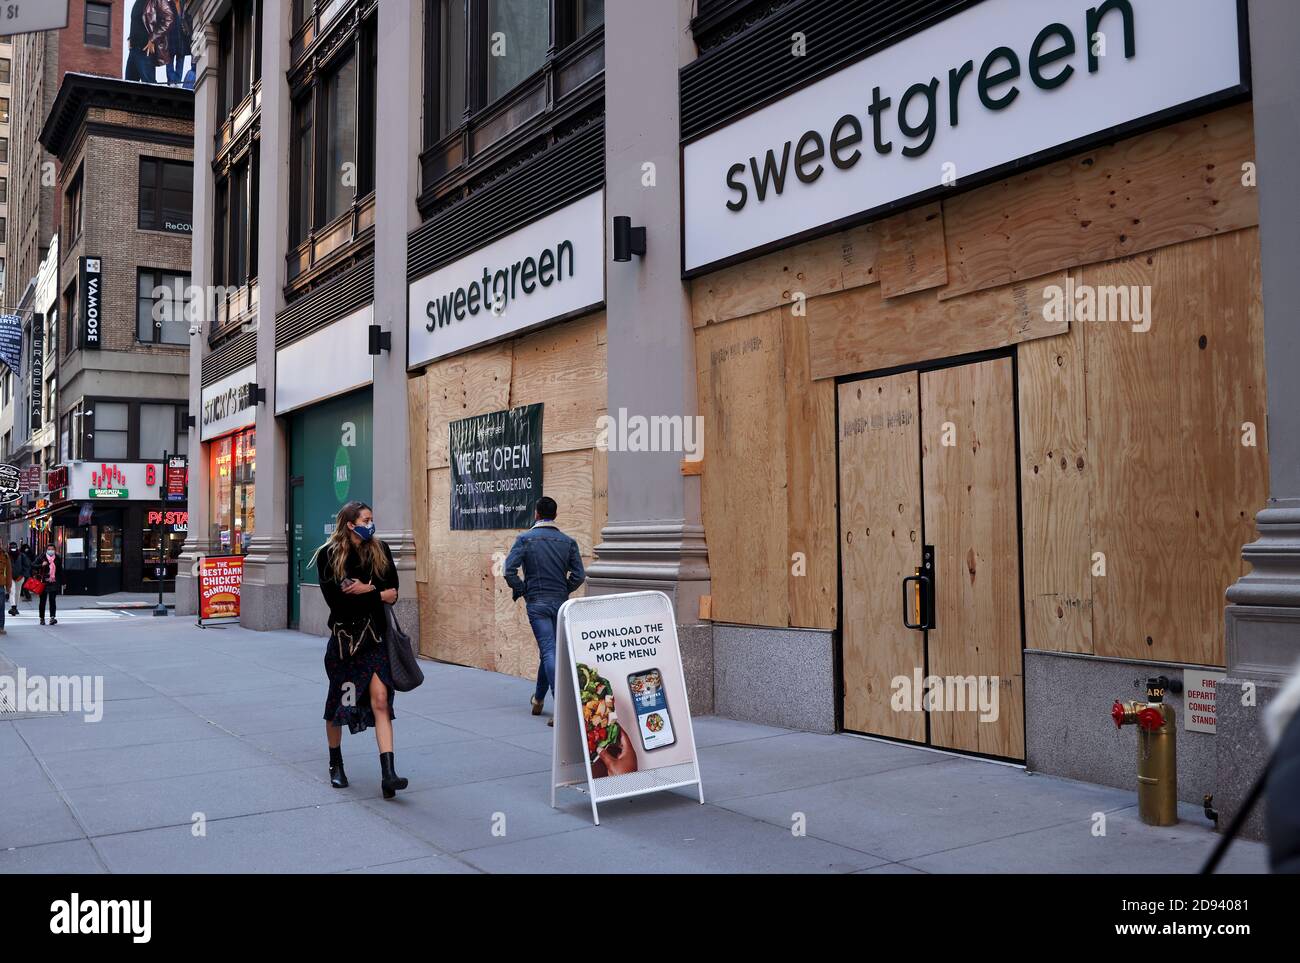 New York City, New York, United States. 2nd Nov, 2020. United States Election. Store fronts boarded up in the Herald Sqare section of Manhattan in anticipation of potential violence following Tuesday's United States Presidential election between Donald Trump and former Vice President Joe Biden. Credit: Adam Stoltman/Alamy Live News Stock Photo